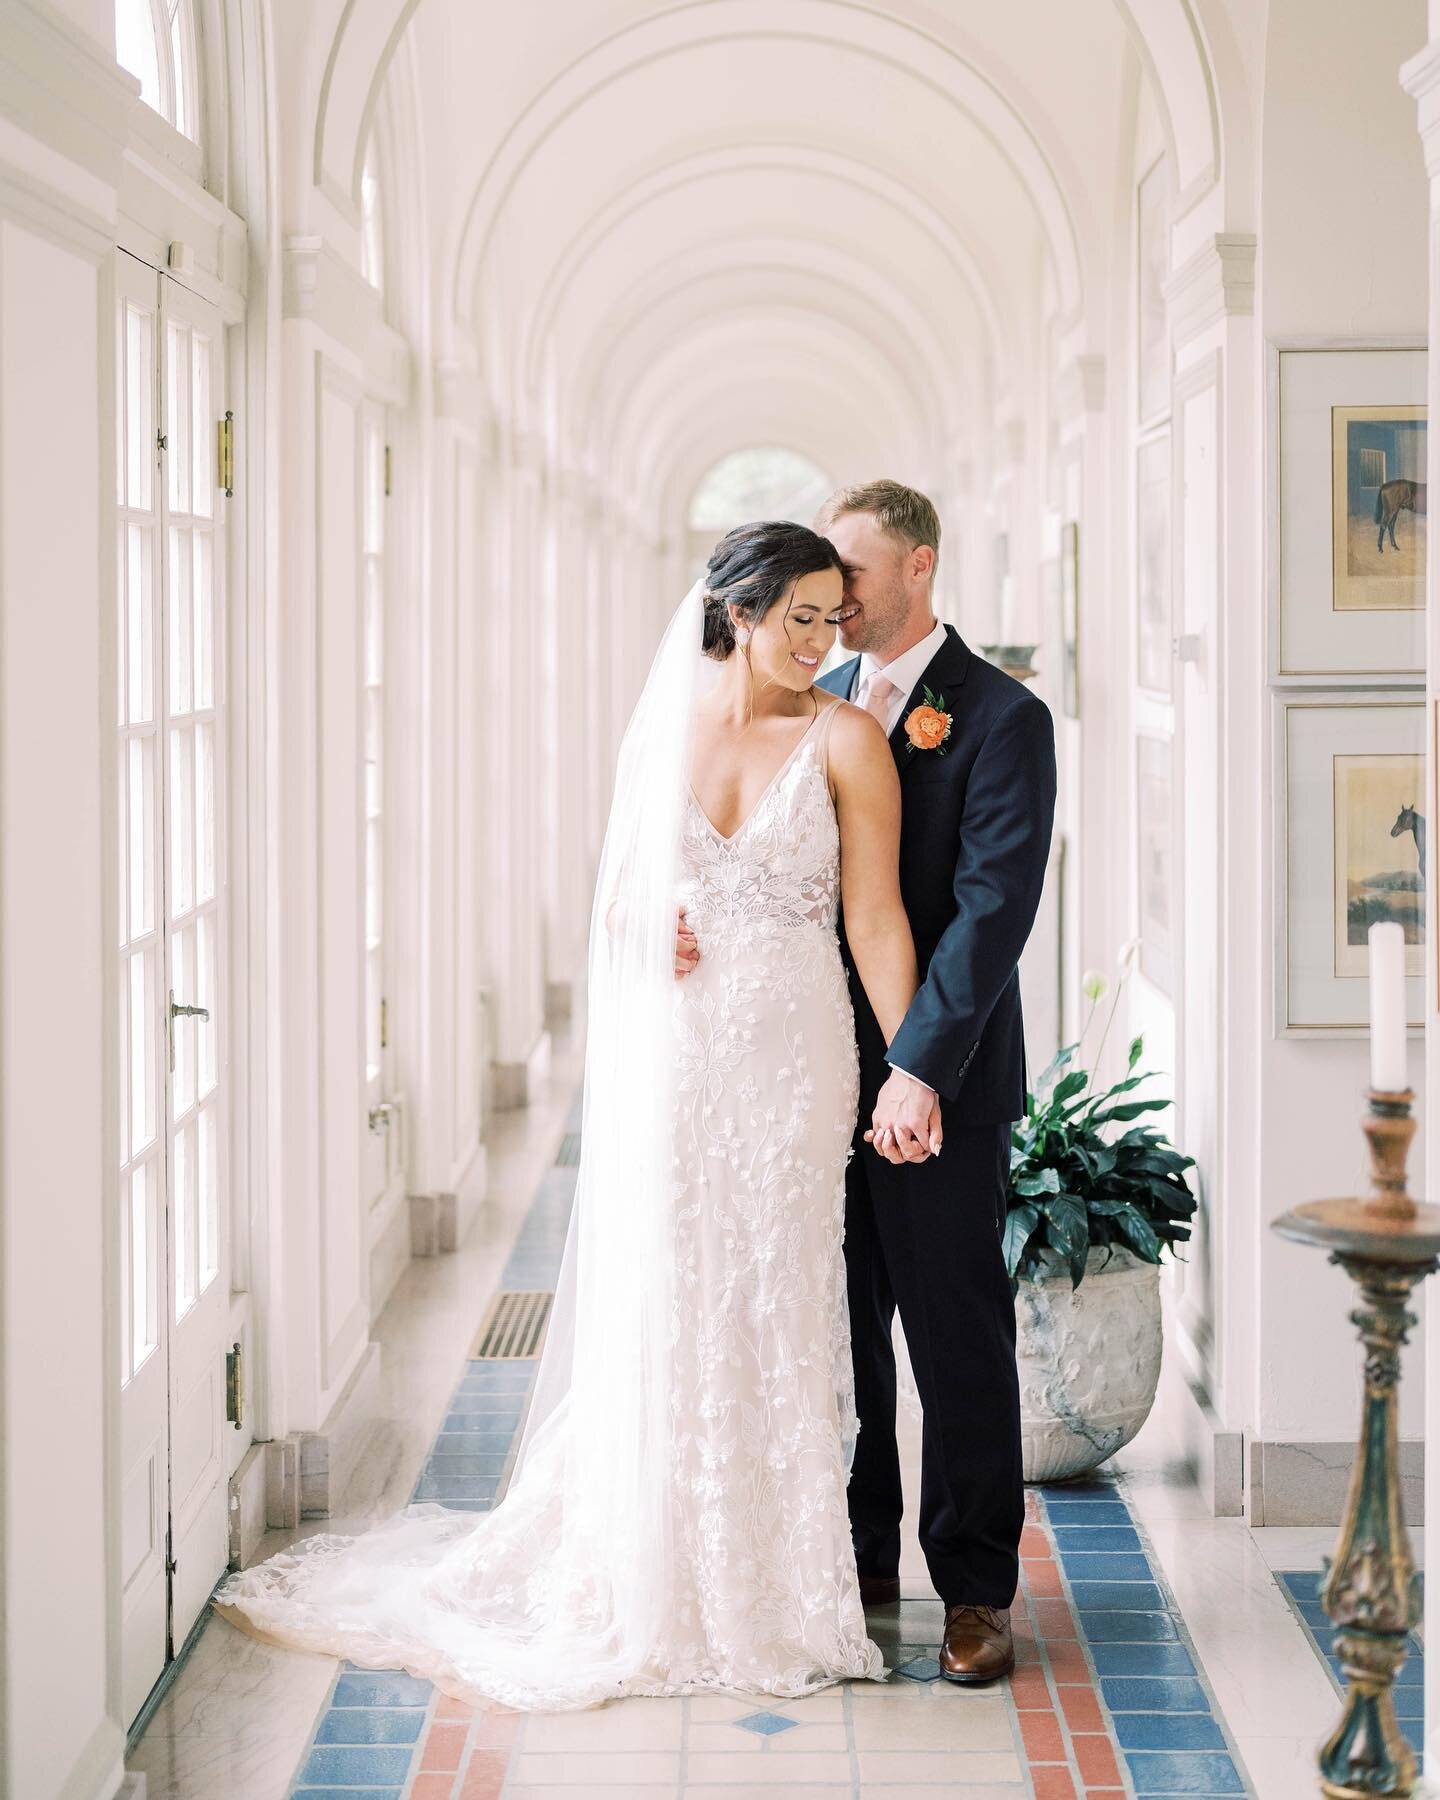 Beautiful and timeless is how we would described Madison + Blake&rsquo;s day at @pebblehillplantation! We had the best time capturing such a lovely couple 🤍
.
.
.
#thomasvillegawedding #georgiaweddingphotographer #pebblehillplantationweddings #weddi